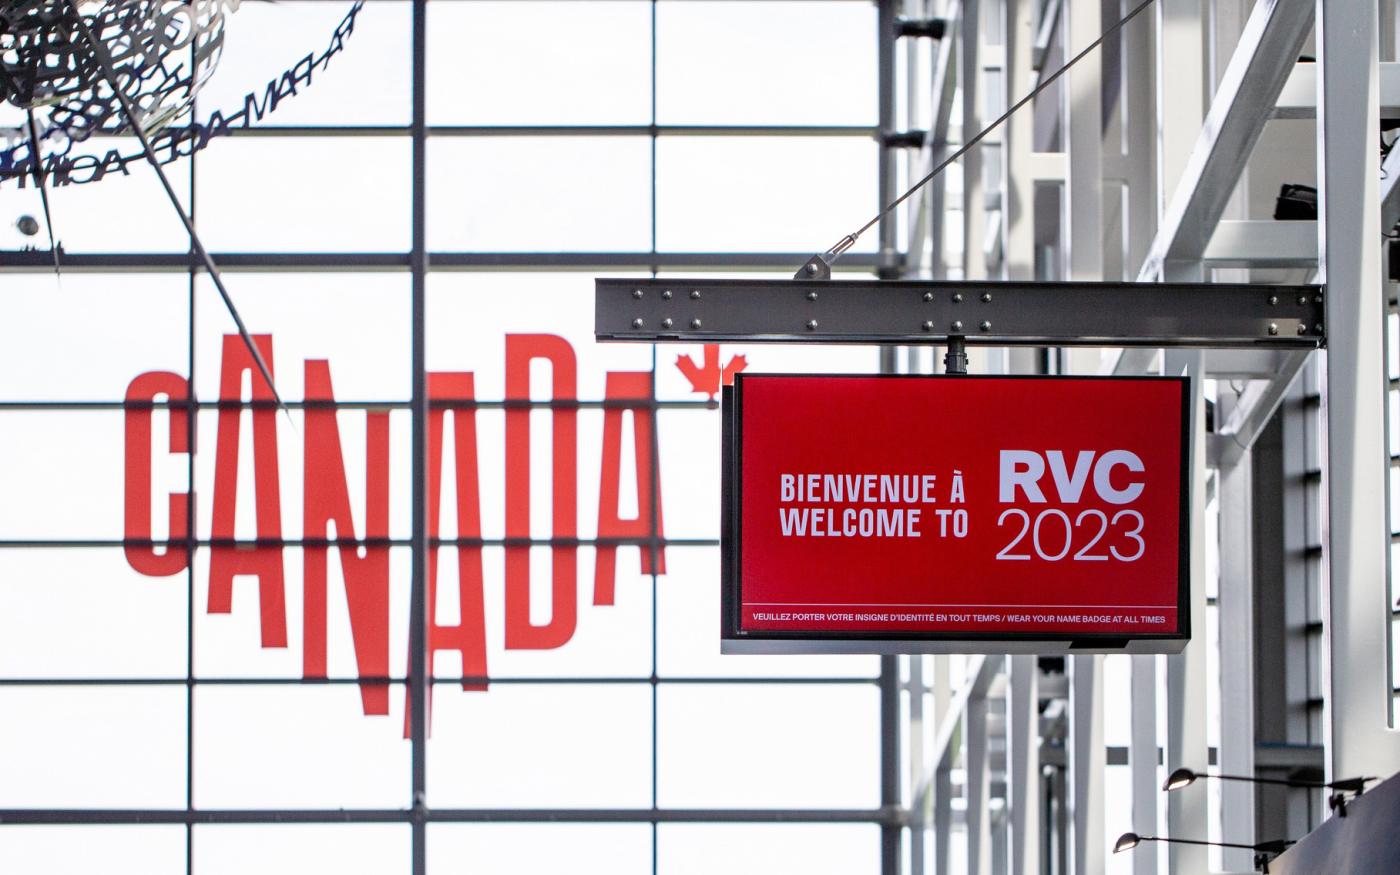 Canada branded window decal and a TV screen that's branded to welcome people to the trade show